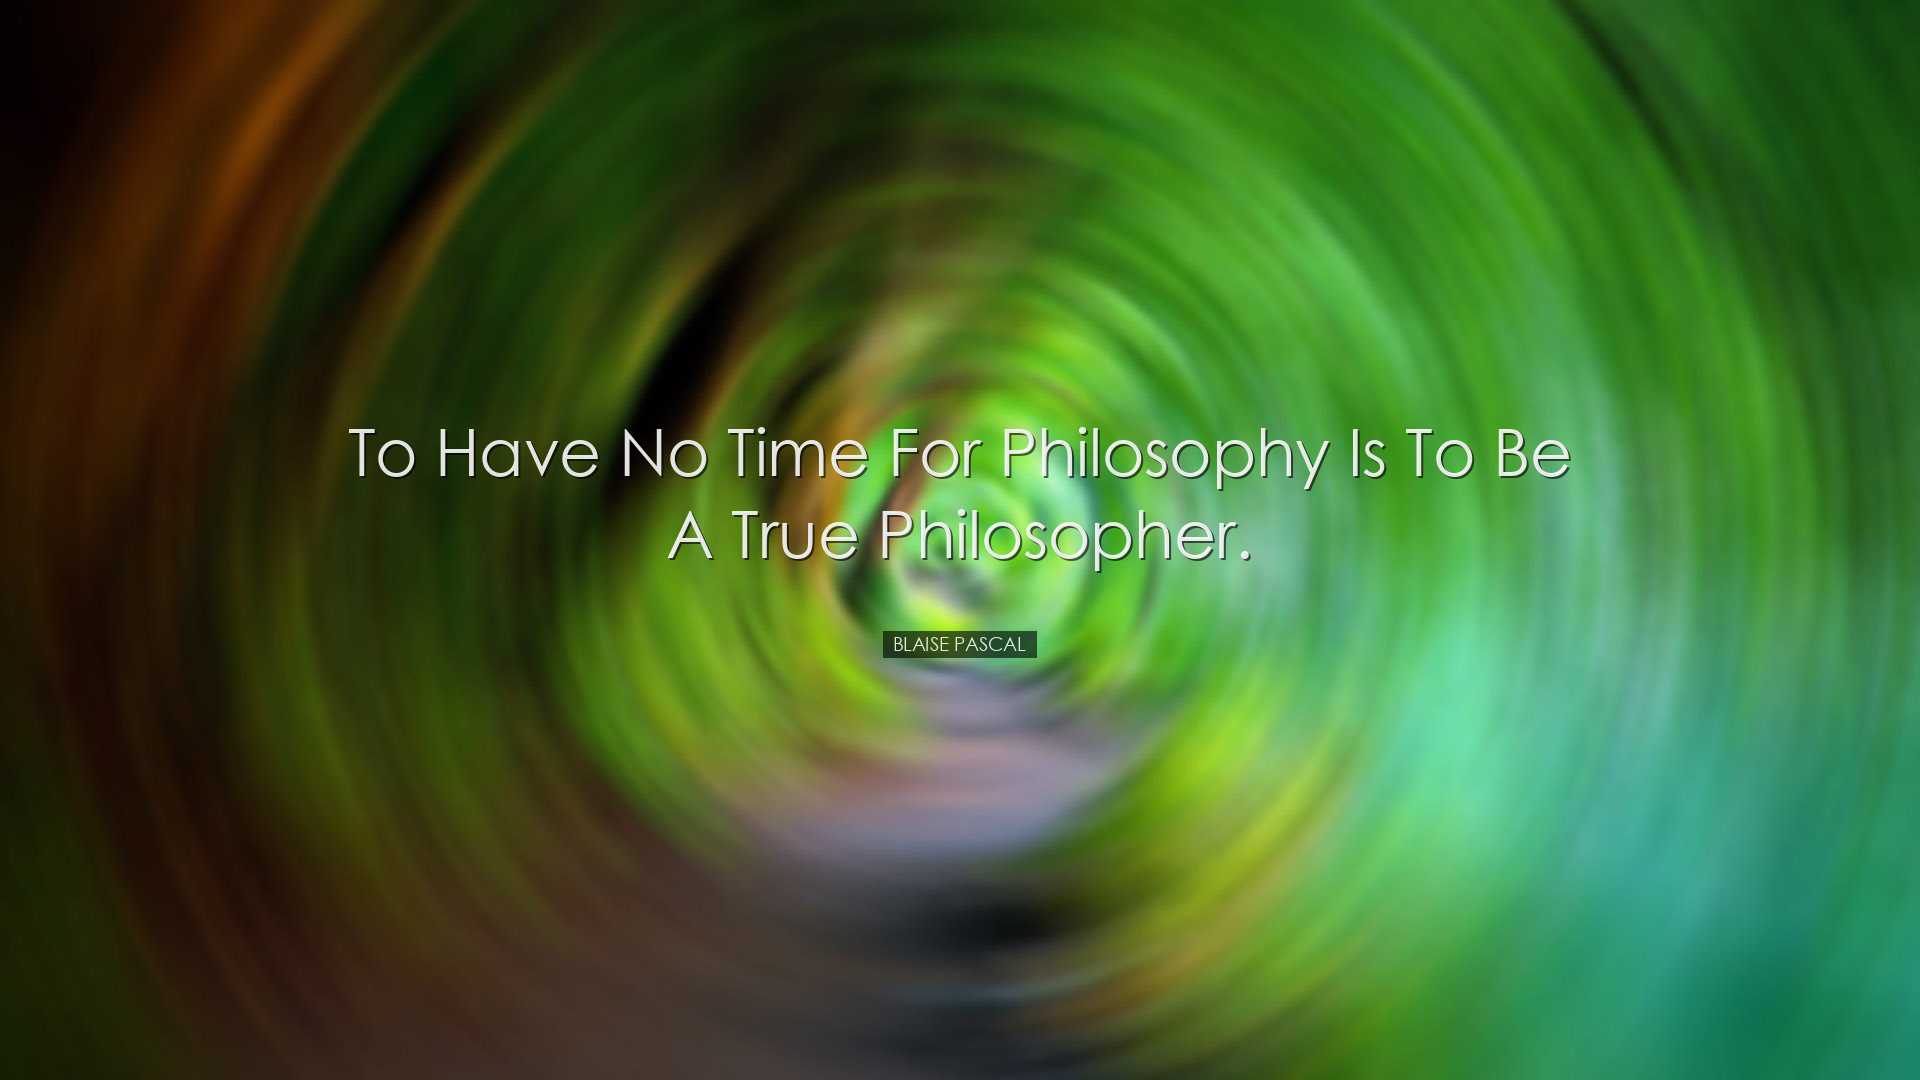 To have no time for philosophy is to be a true philosopher. - Blai